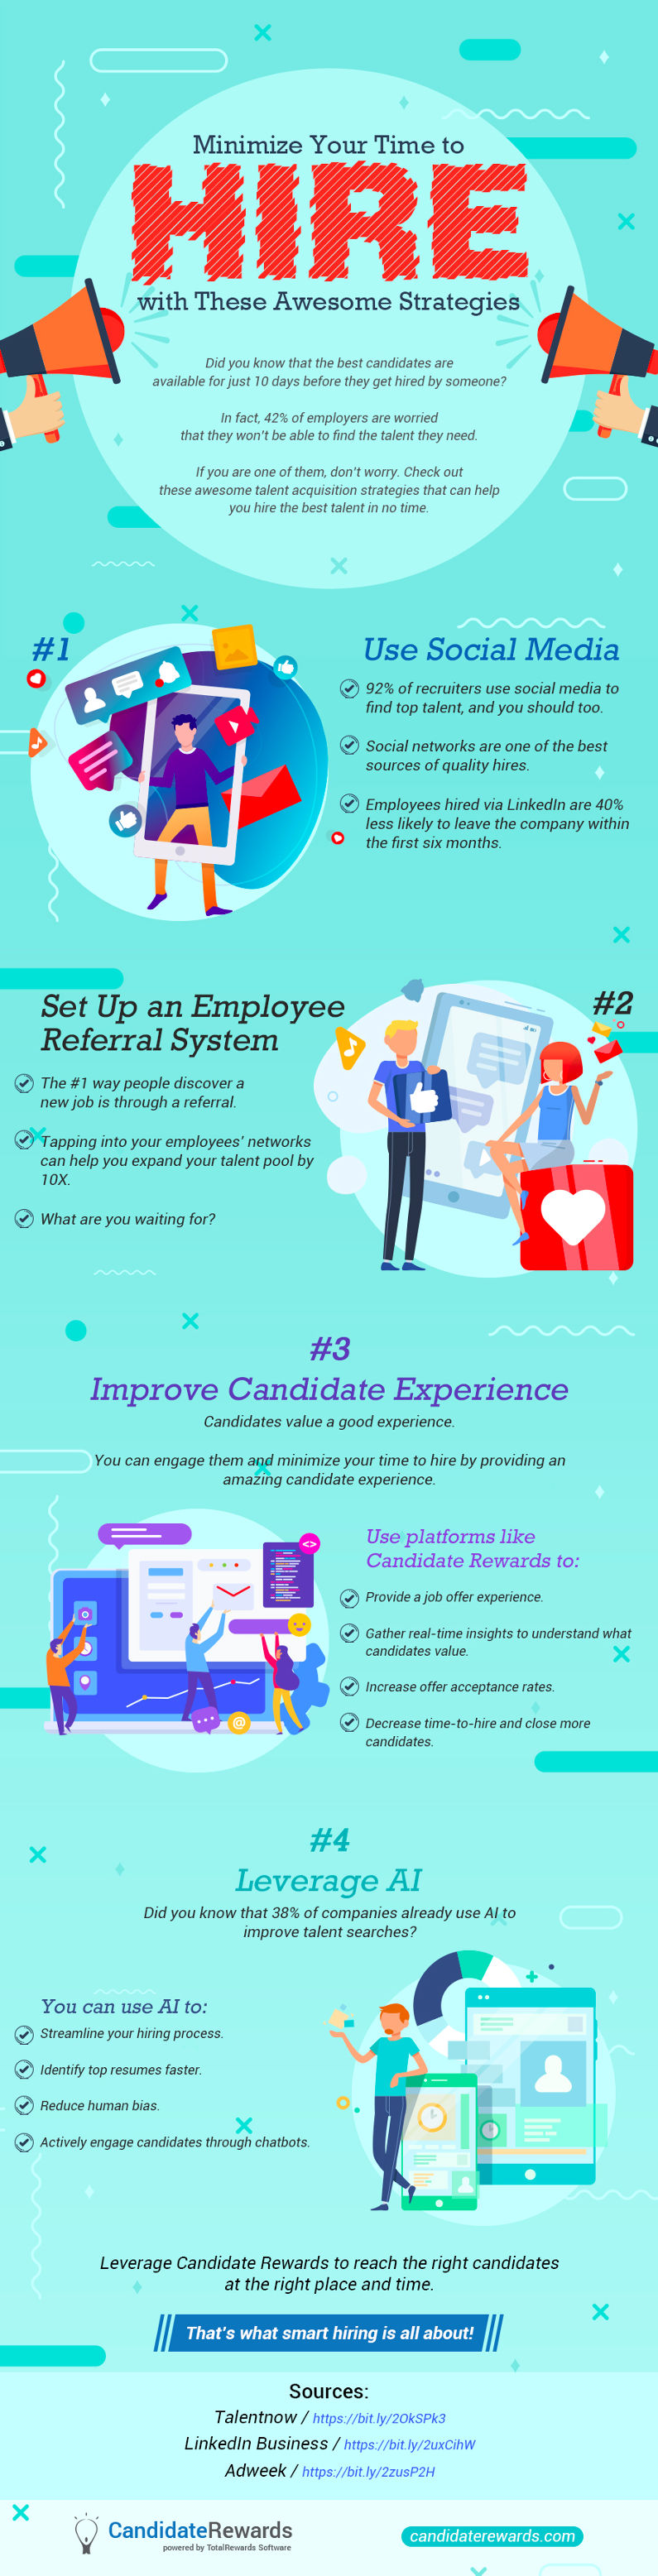 Hiring strategy infographic